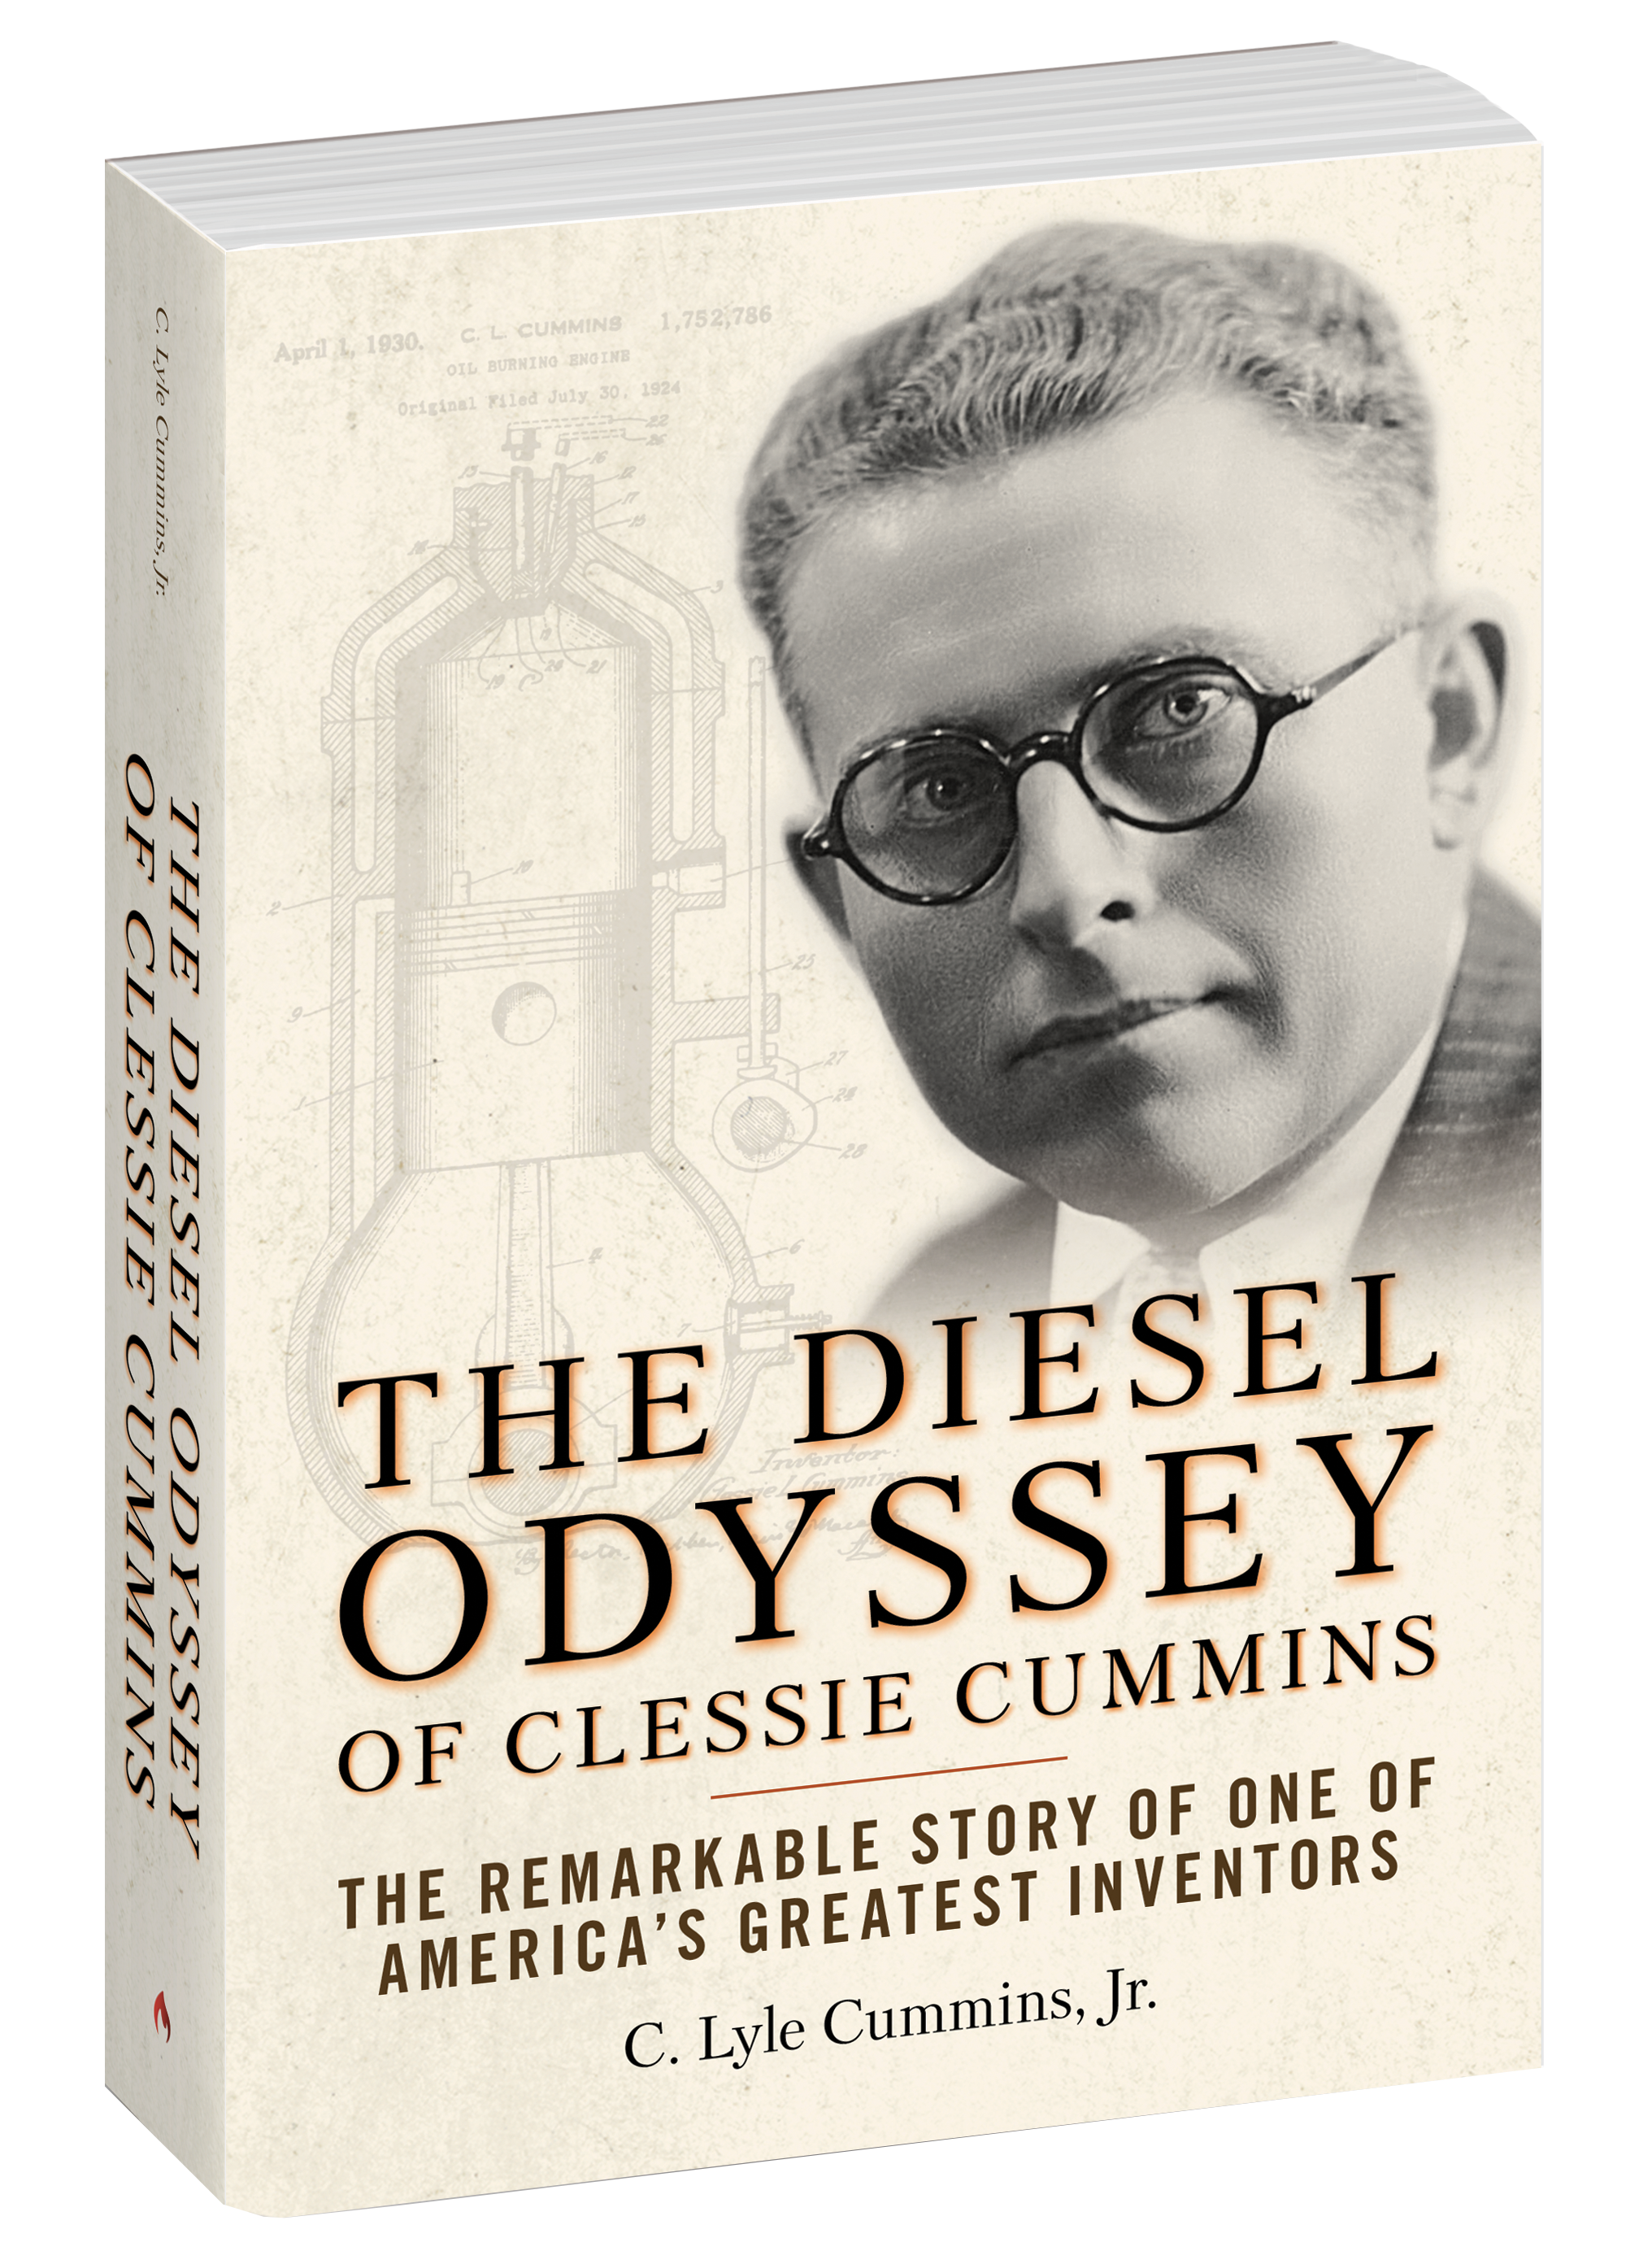 Cover file for The Diesel Odyssey of Clessie Cummins by C. Lyle Cummins, Jr.